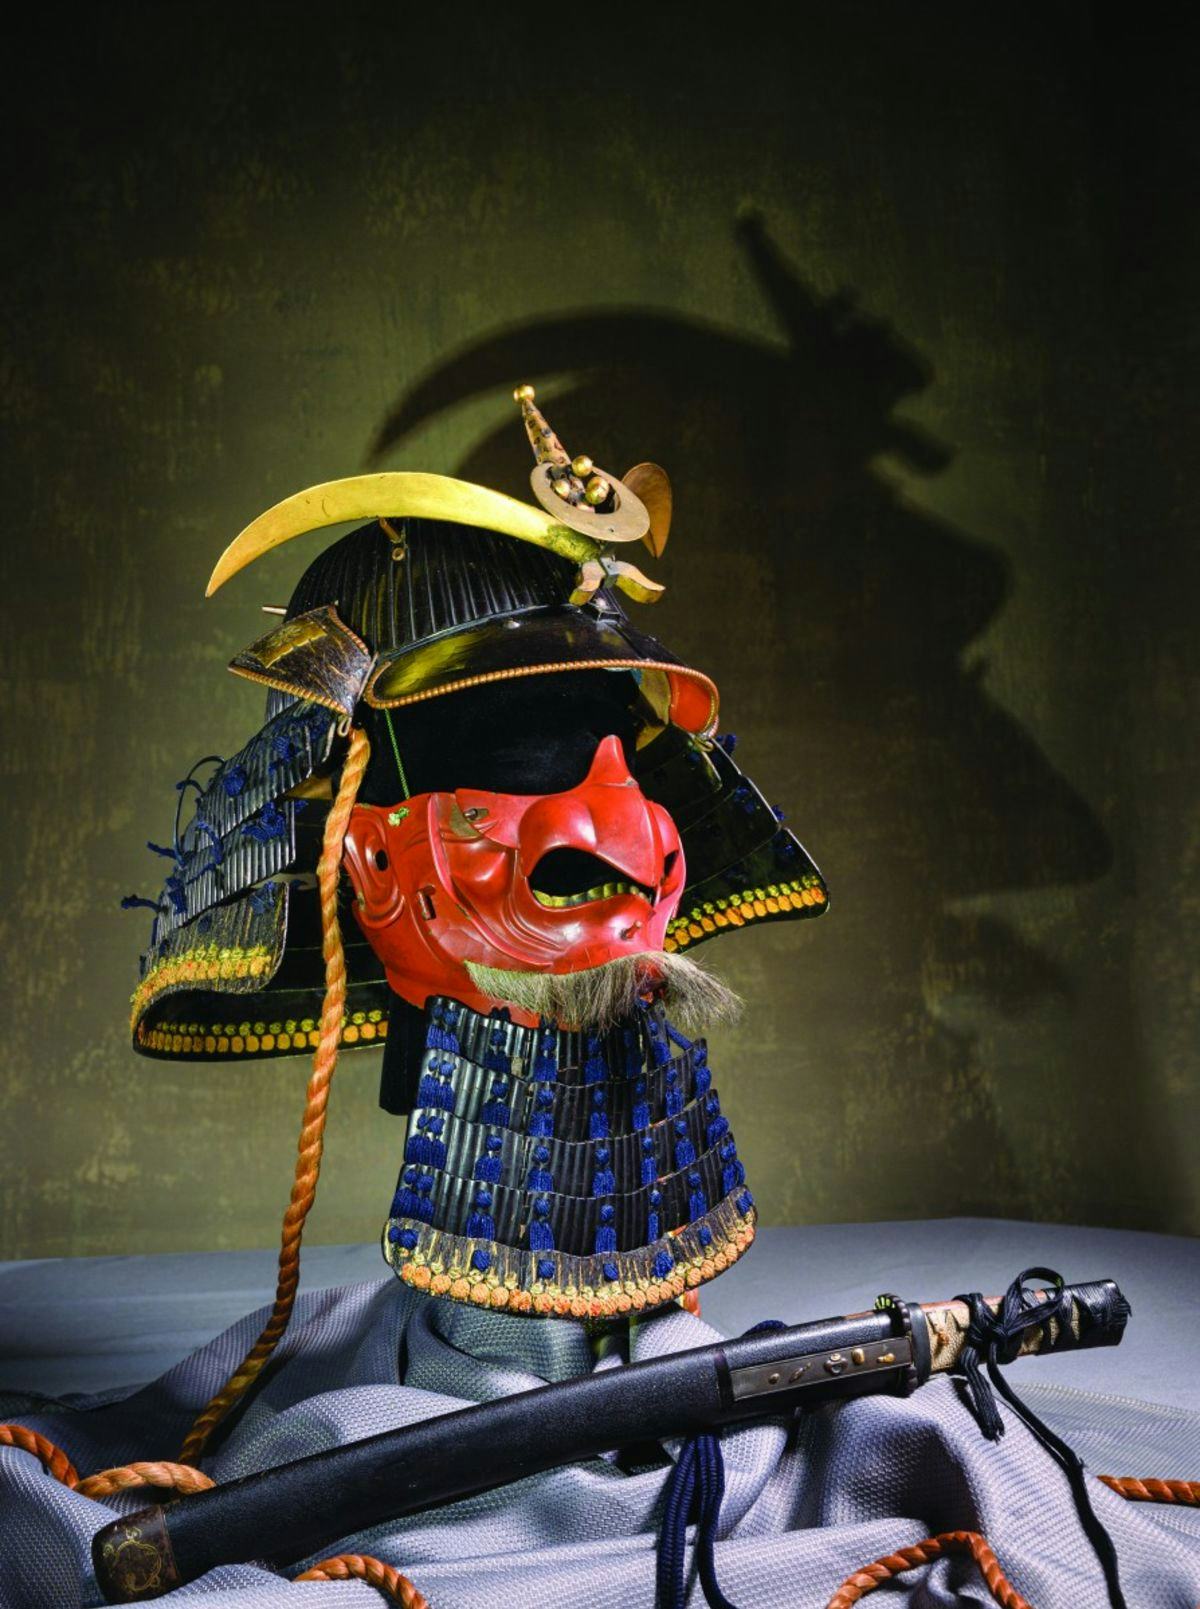 Abe’s gift included many pieces. Shown here are a riveted helmet, mask-like facial armor and a sheathed short sword, known as a wakizashi.